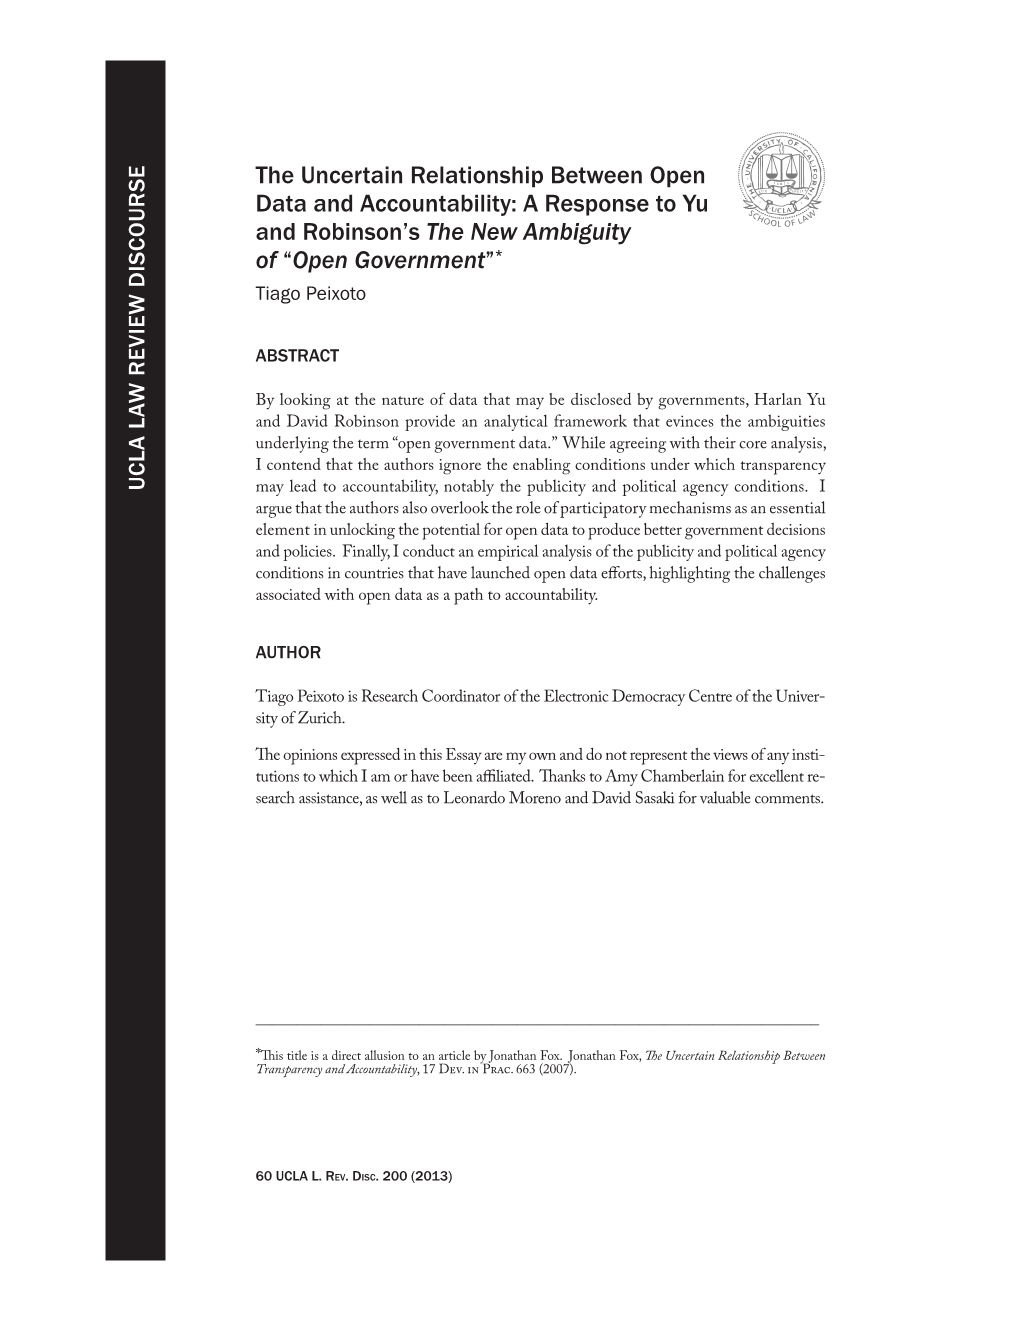 The Uncertain Relationship Between Open Data and Accountability: a Response to Yu and Robinson’S the New Ambiguity of “Open Government”* Tiago Peixoto